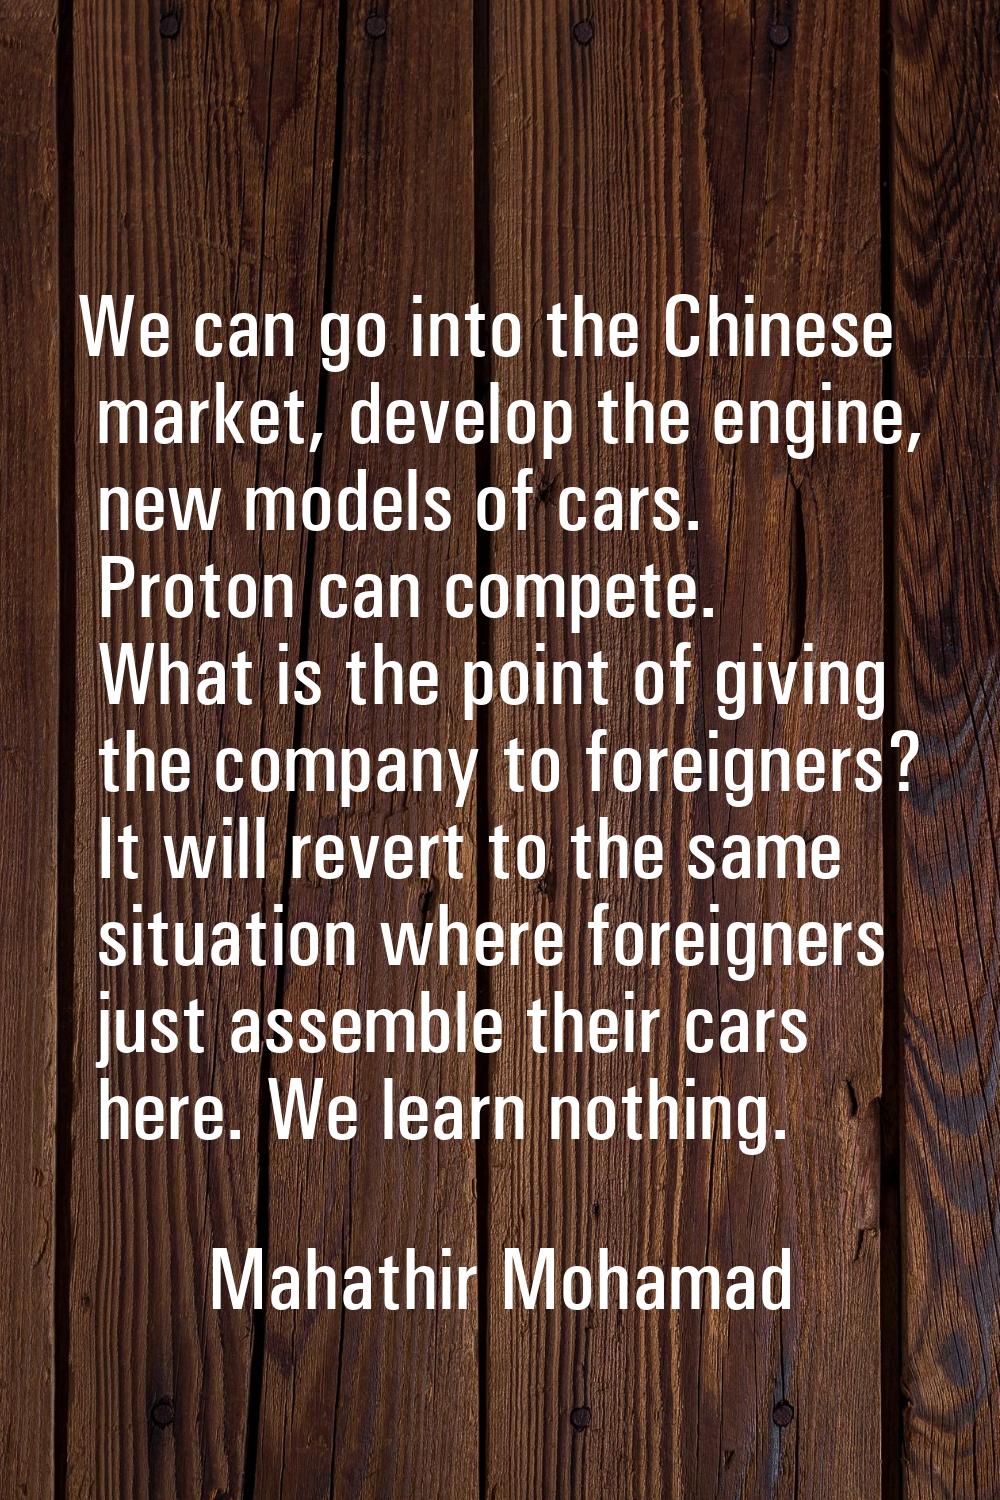 We can go into the Chinese market, develop the engine, new models of cars. Proton can compete. What